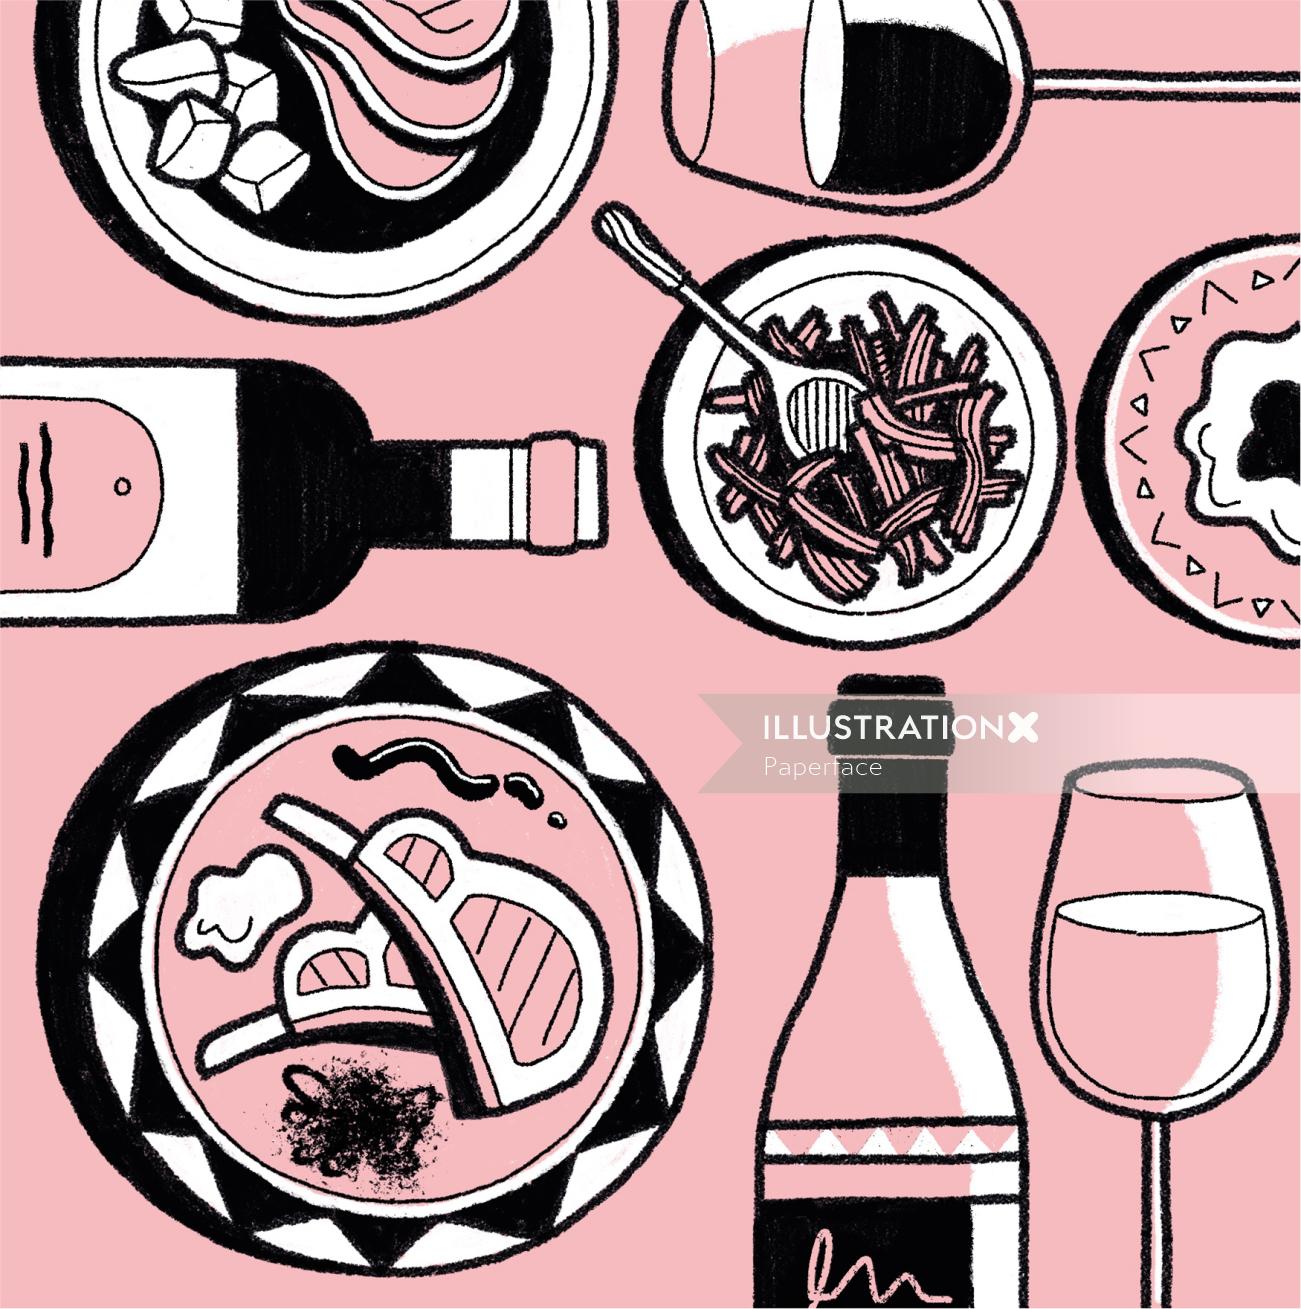 Wine to lamb pairing dishes food and drink illustration